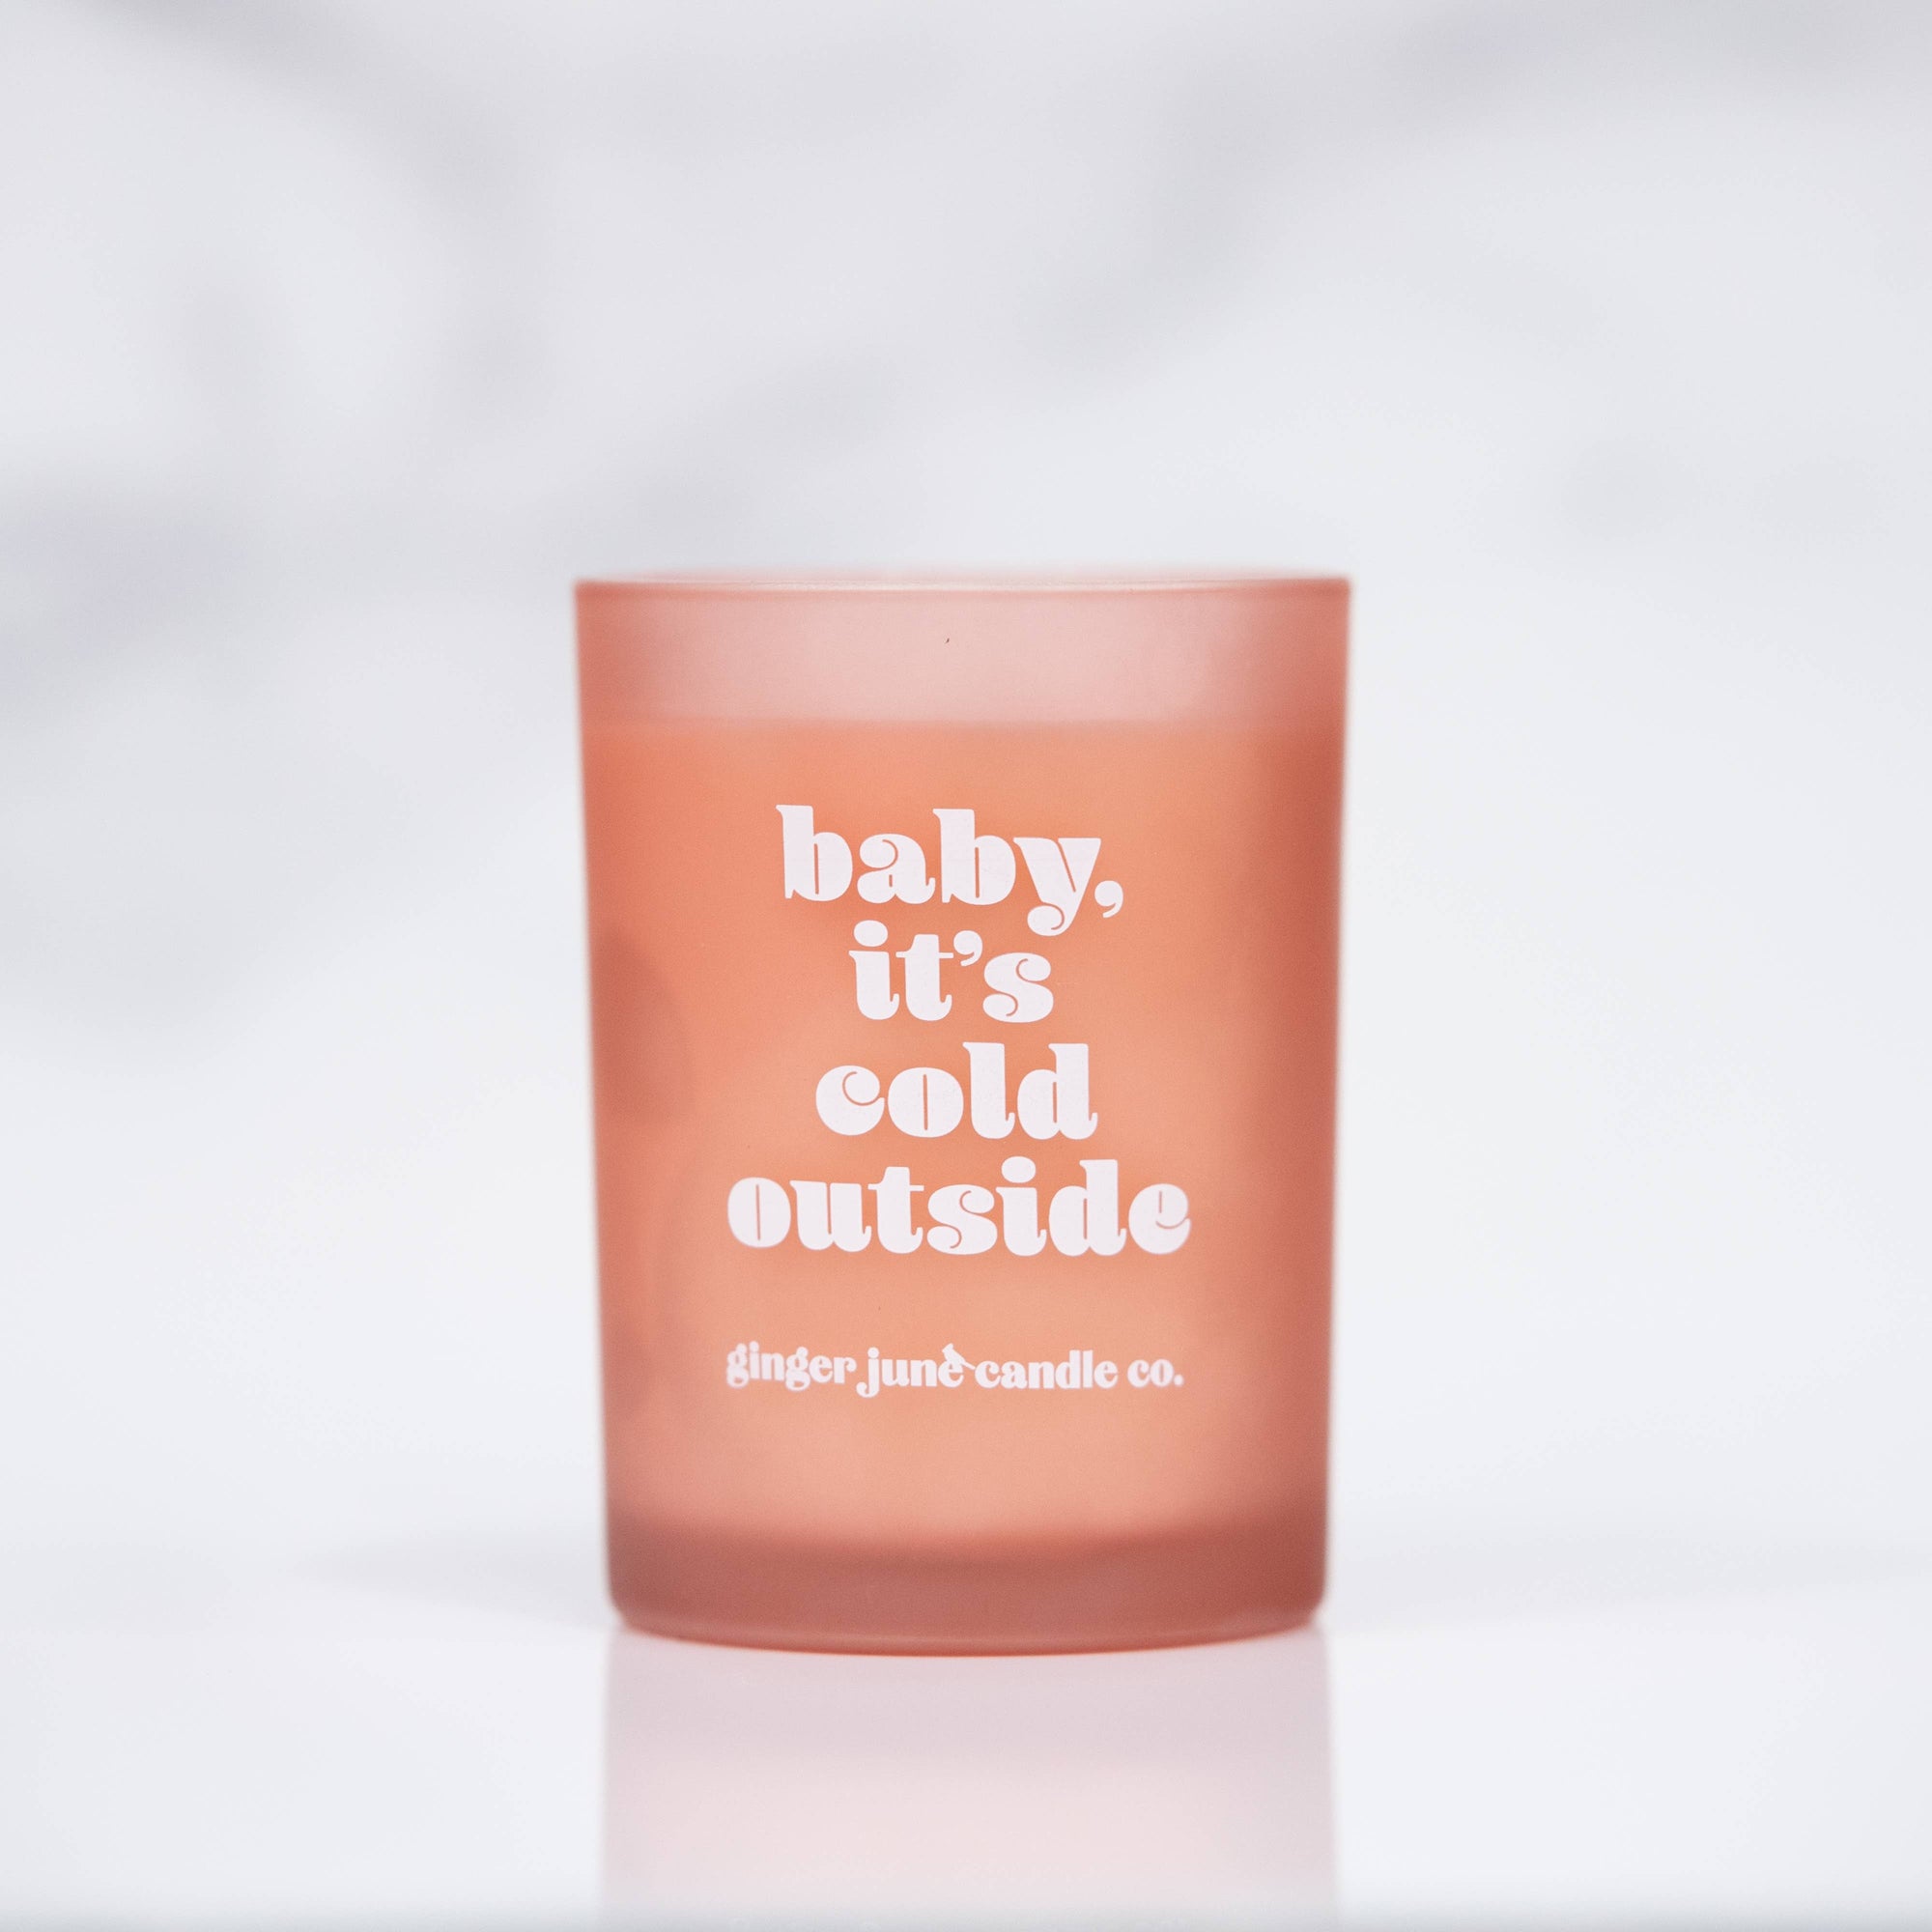 Ginger June Candle Co. BABY IT'S COLD OUTSIDE. • tumbler candle